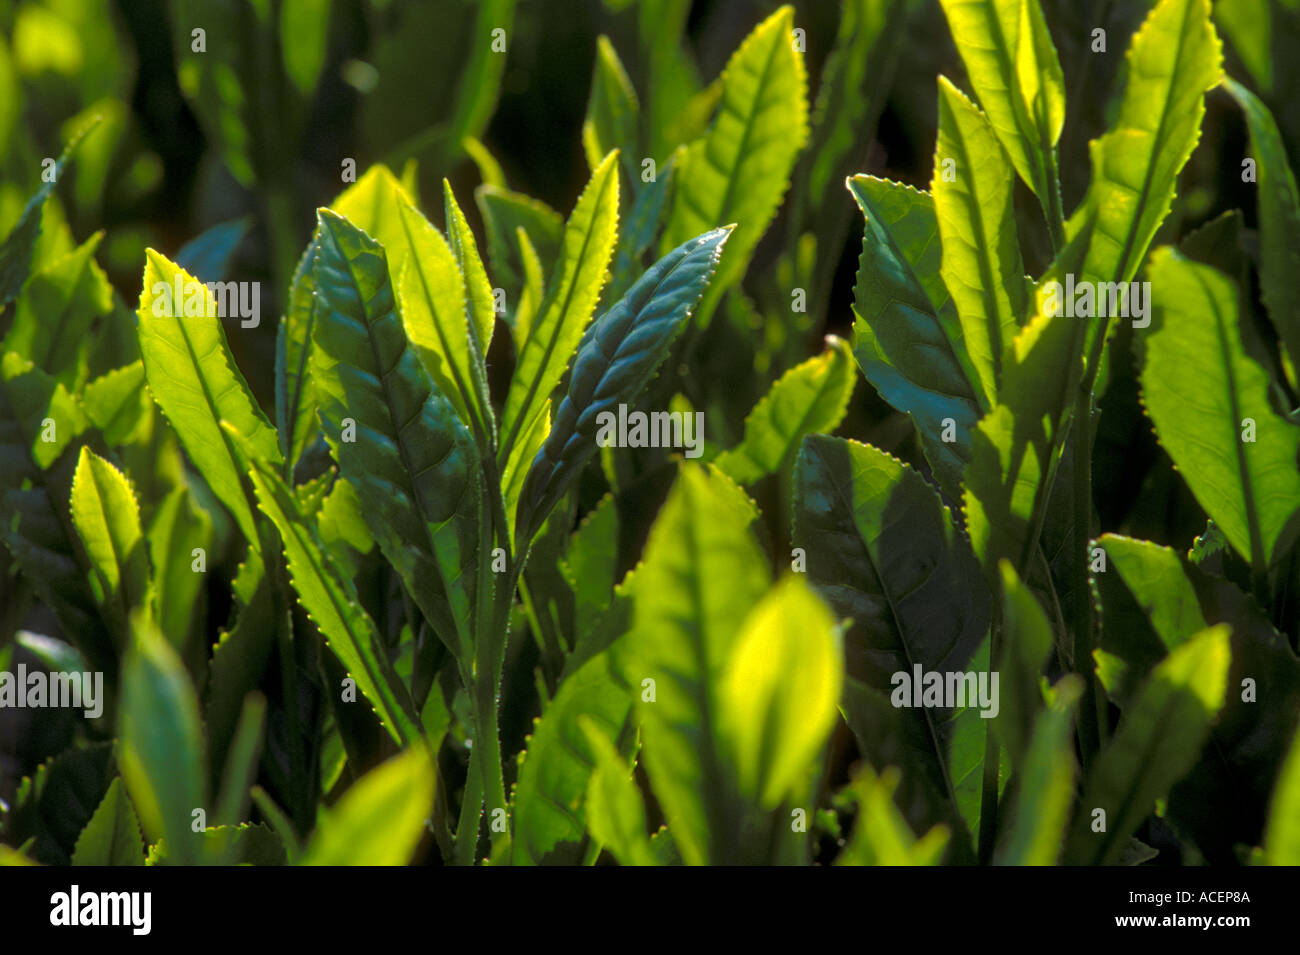 Close up detail of Japanese green tea leaves on bush in plantation field Stock Photo